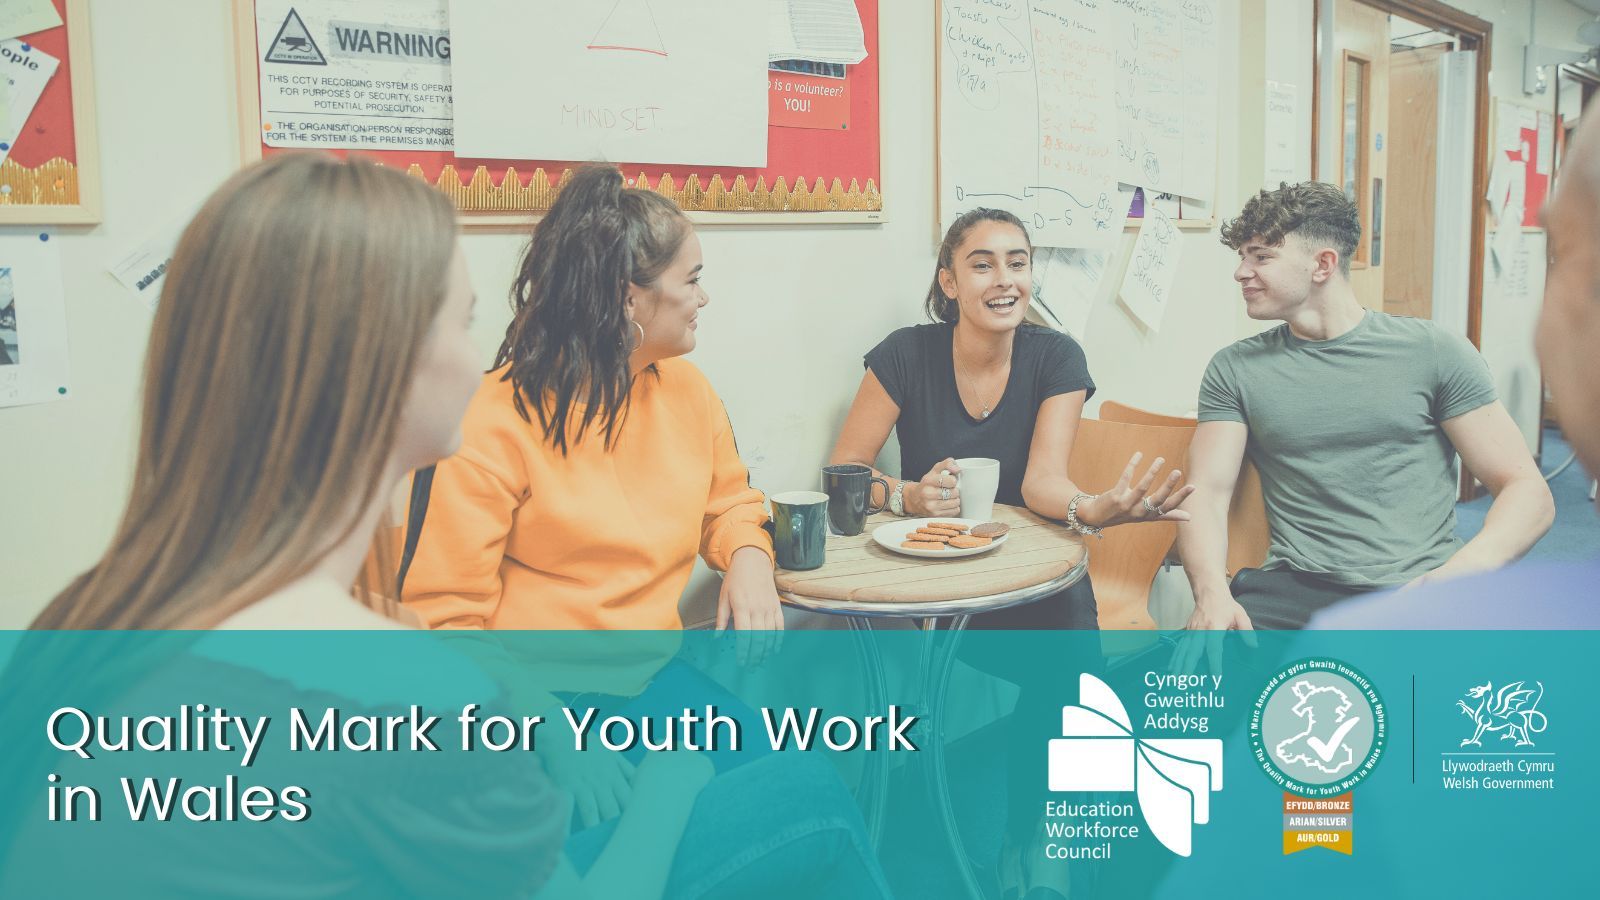 EWC to continue delivering Quality Mark for Youth Work